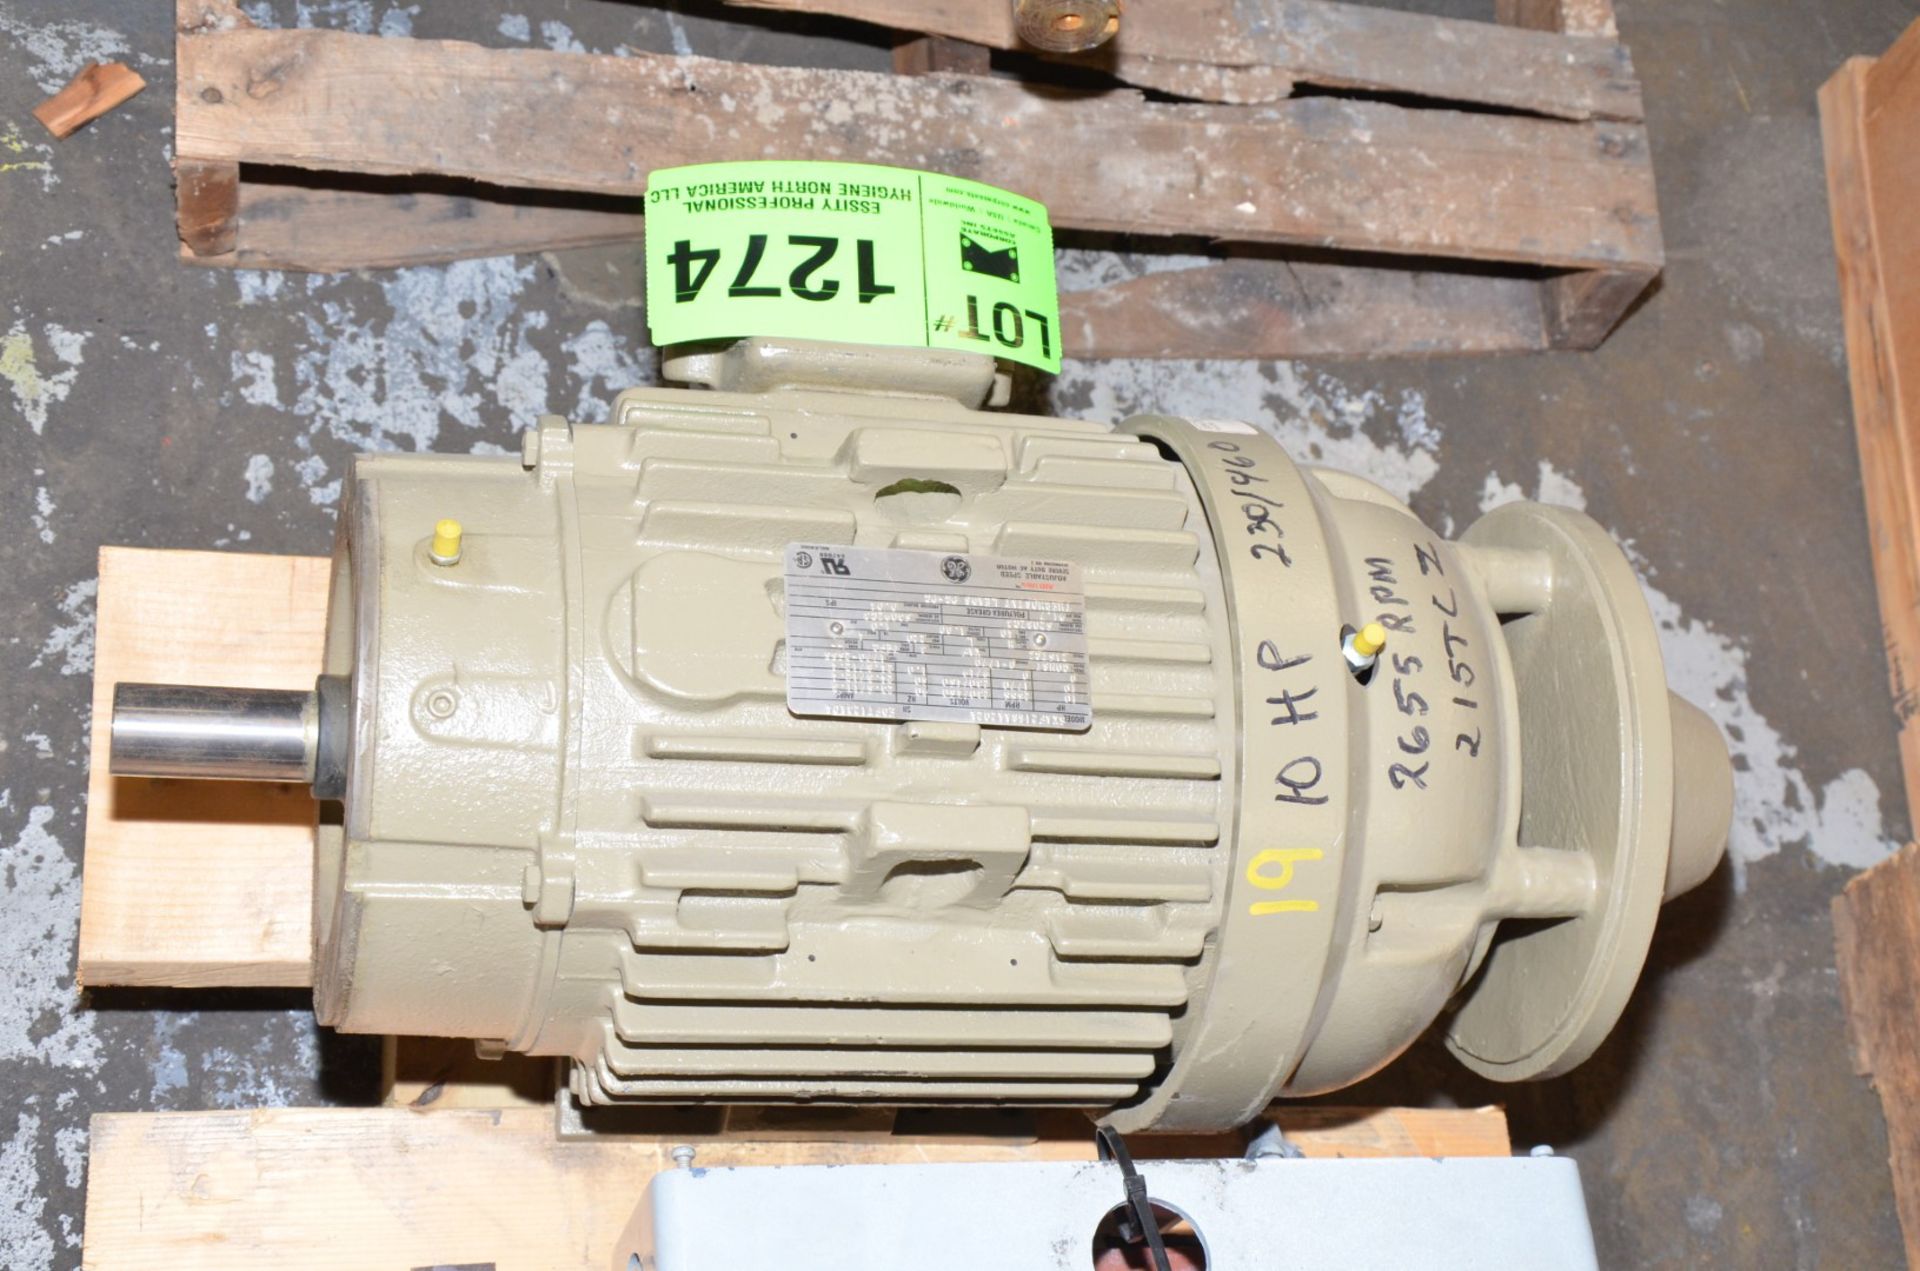 GE 10 HP 460V 1770 RPM ELECTRIC MOTOR [RIGGING FEE FOR LOT #1274 - $25 USD PLUS APPLICABLE TAXES] - Image 2 of 2